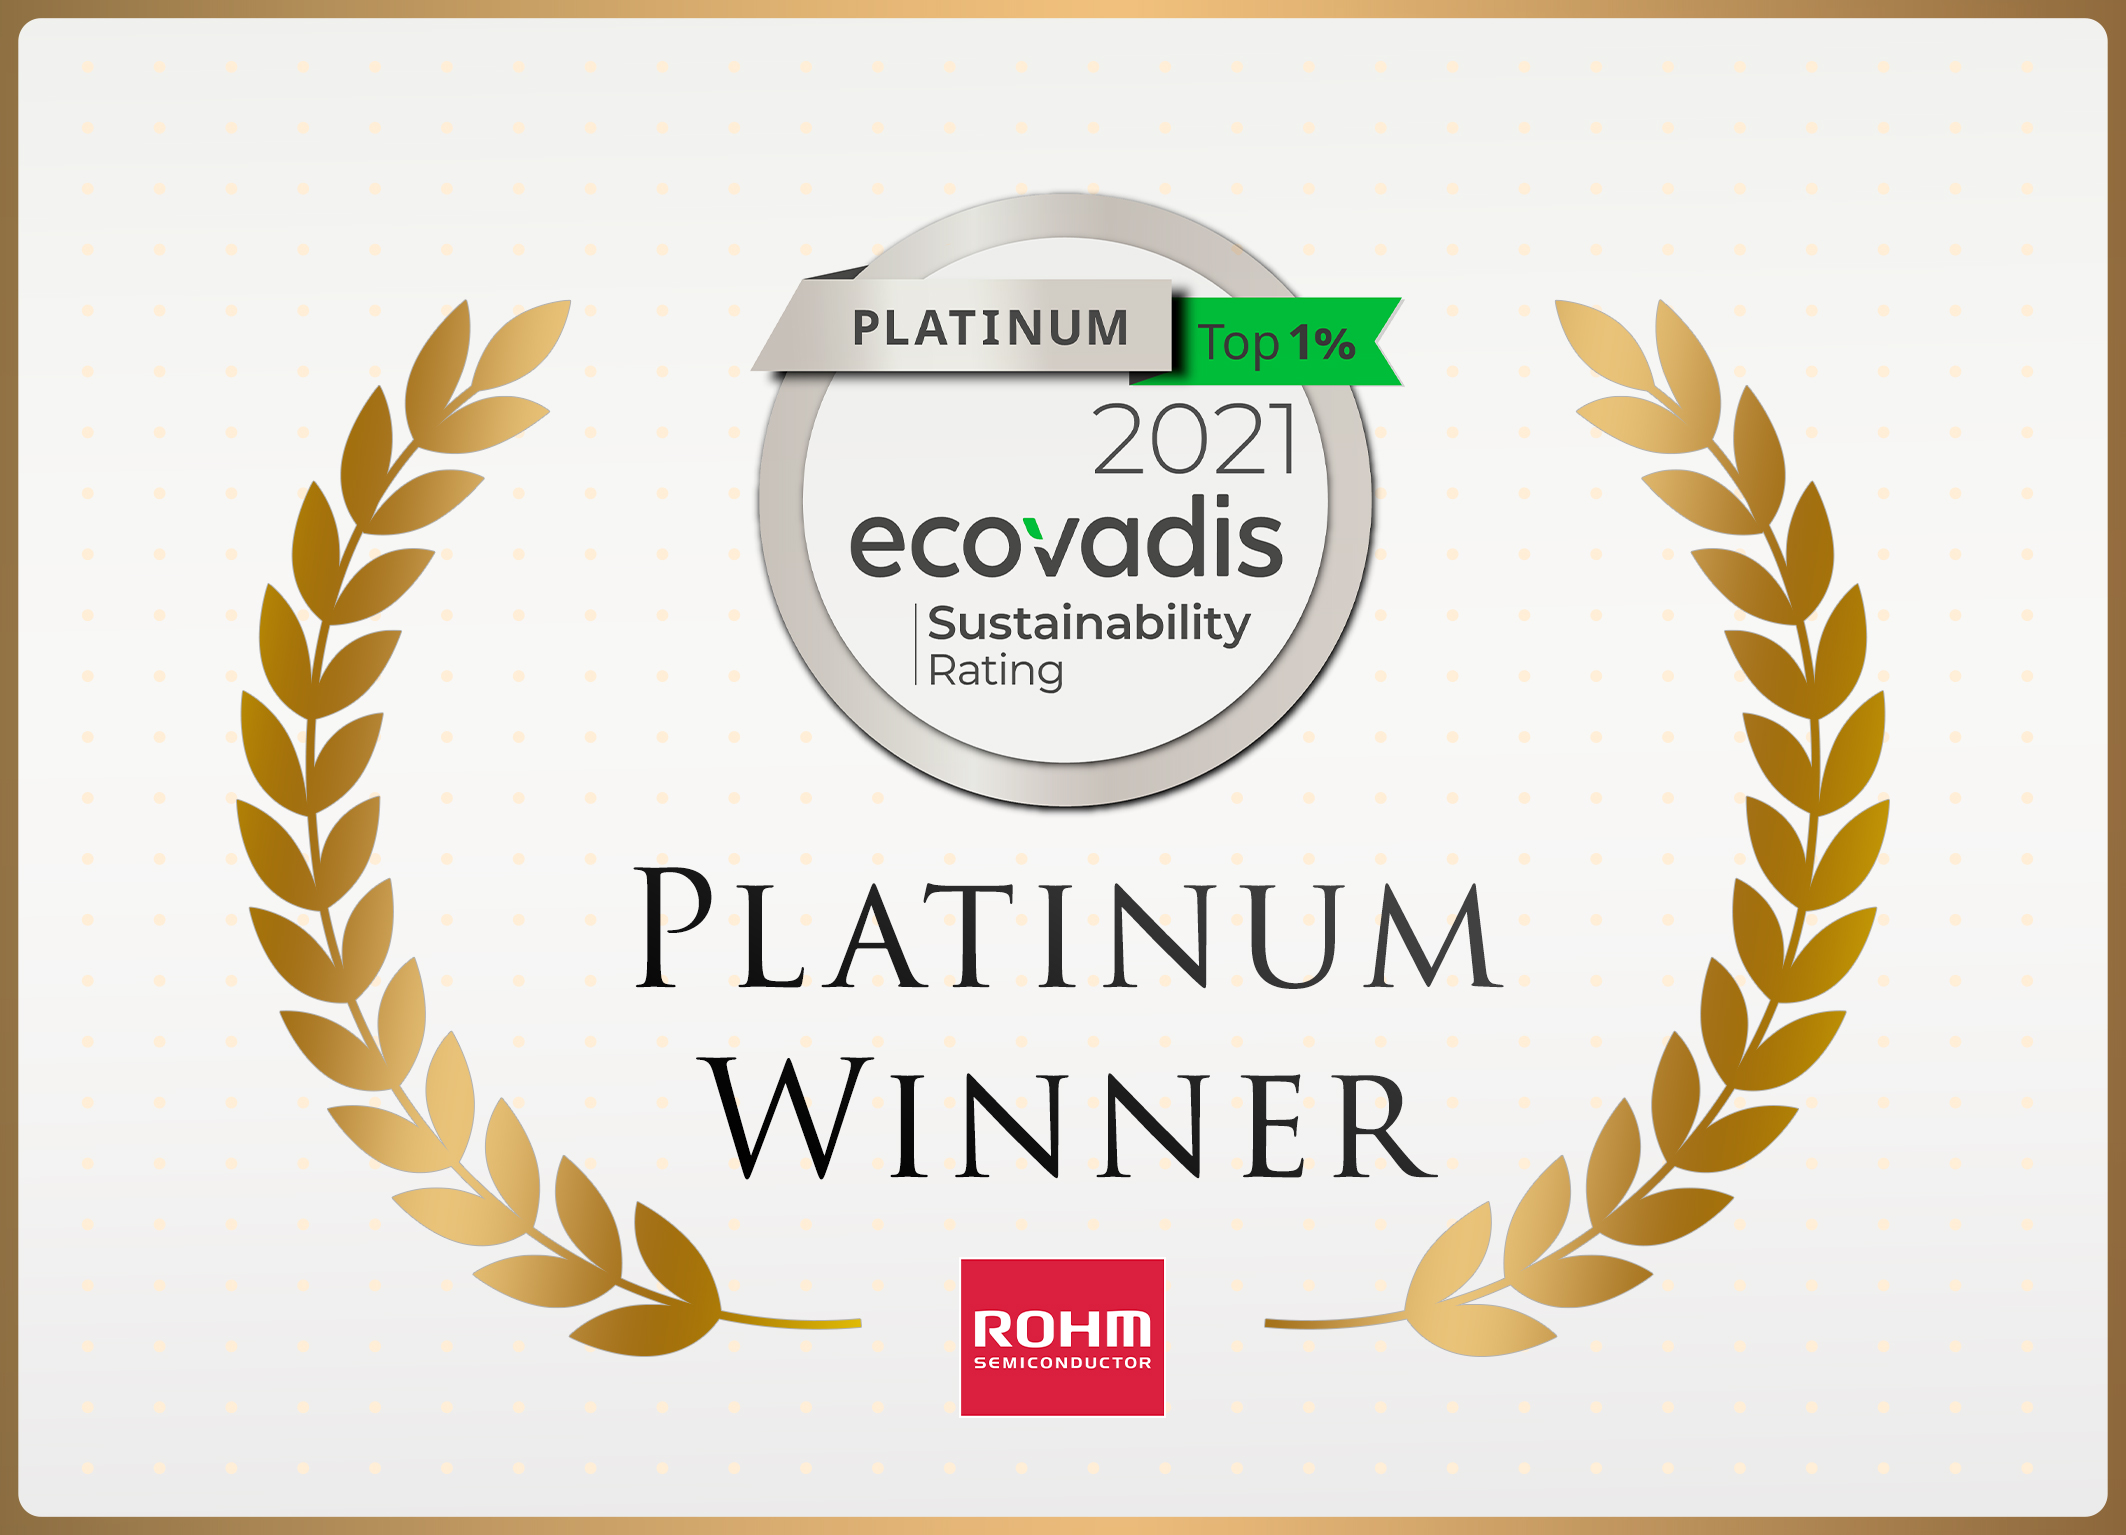 ROHM Awarded Platinum Rating by EcoVadis for 2021 Sustainability Performance